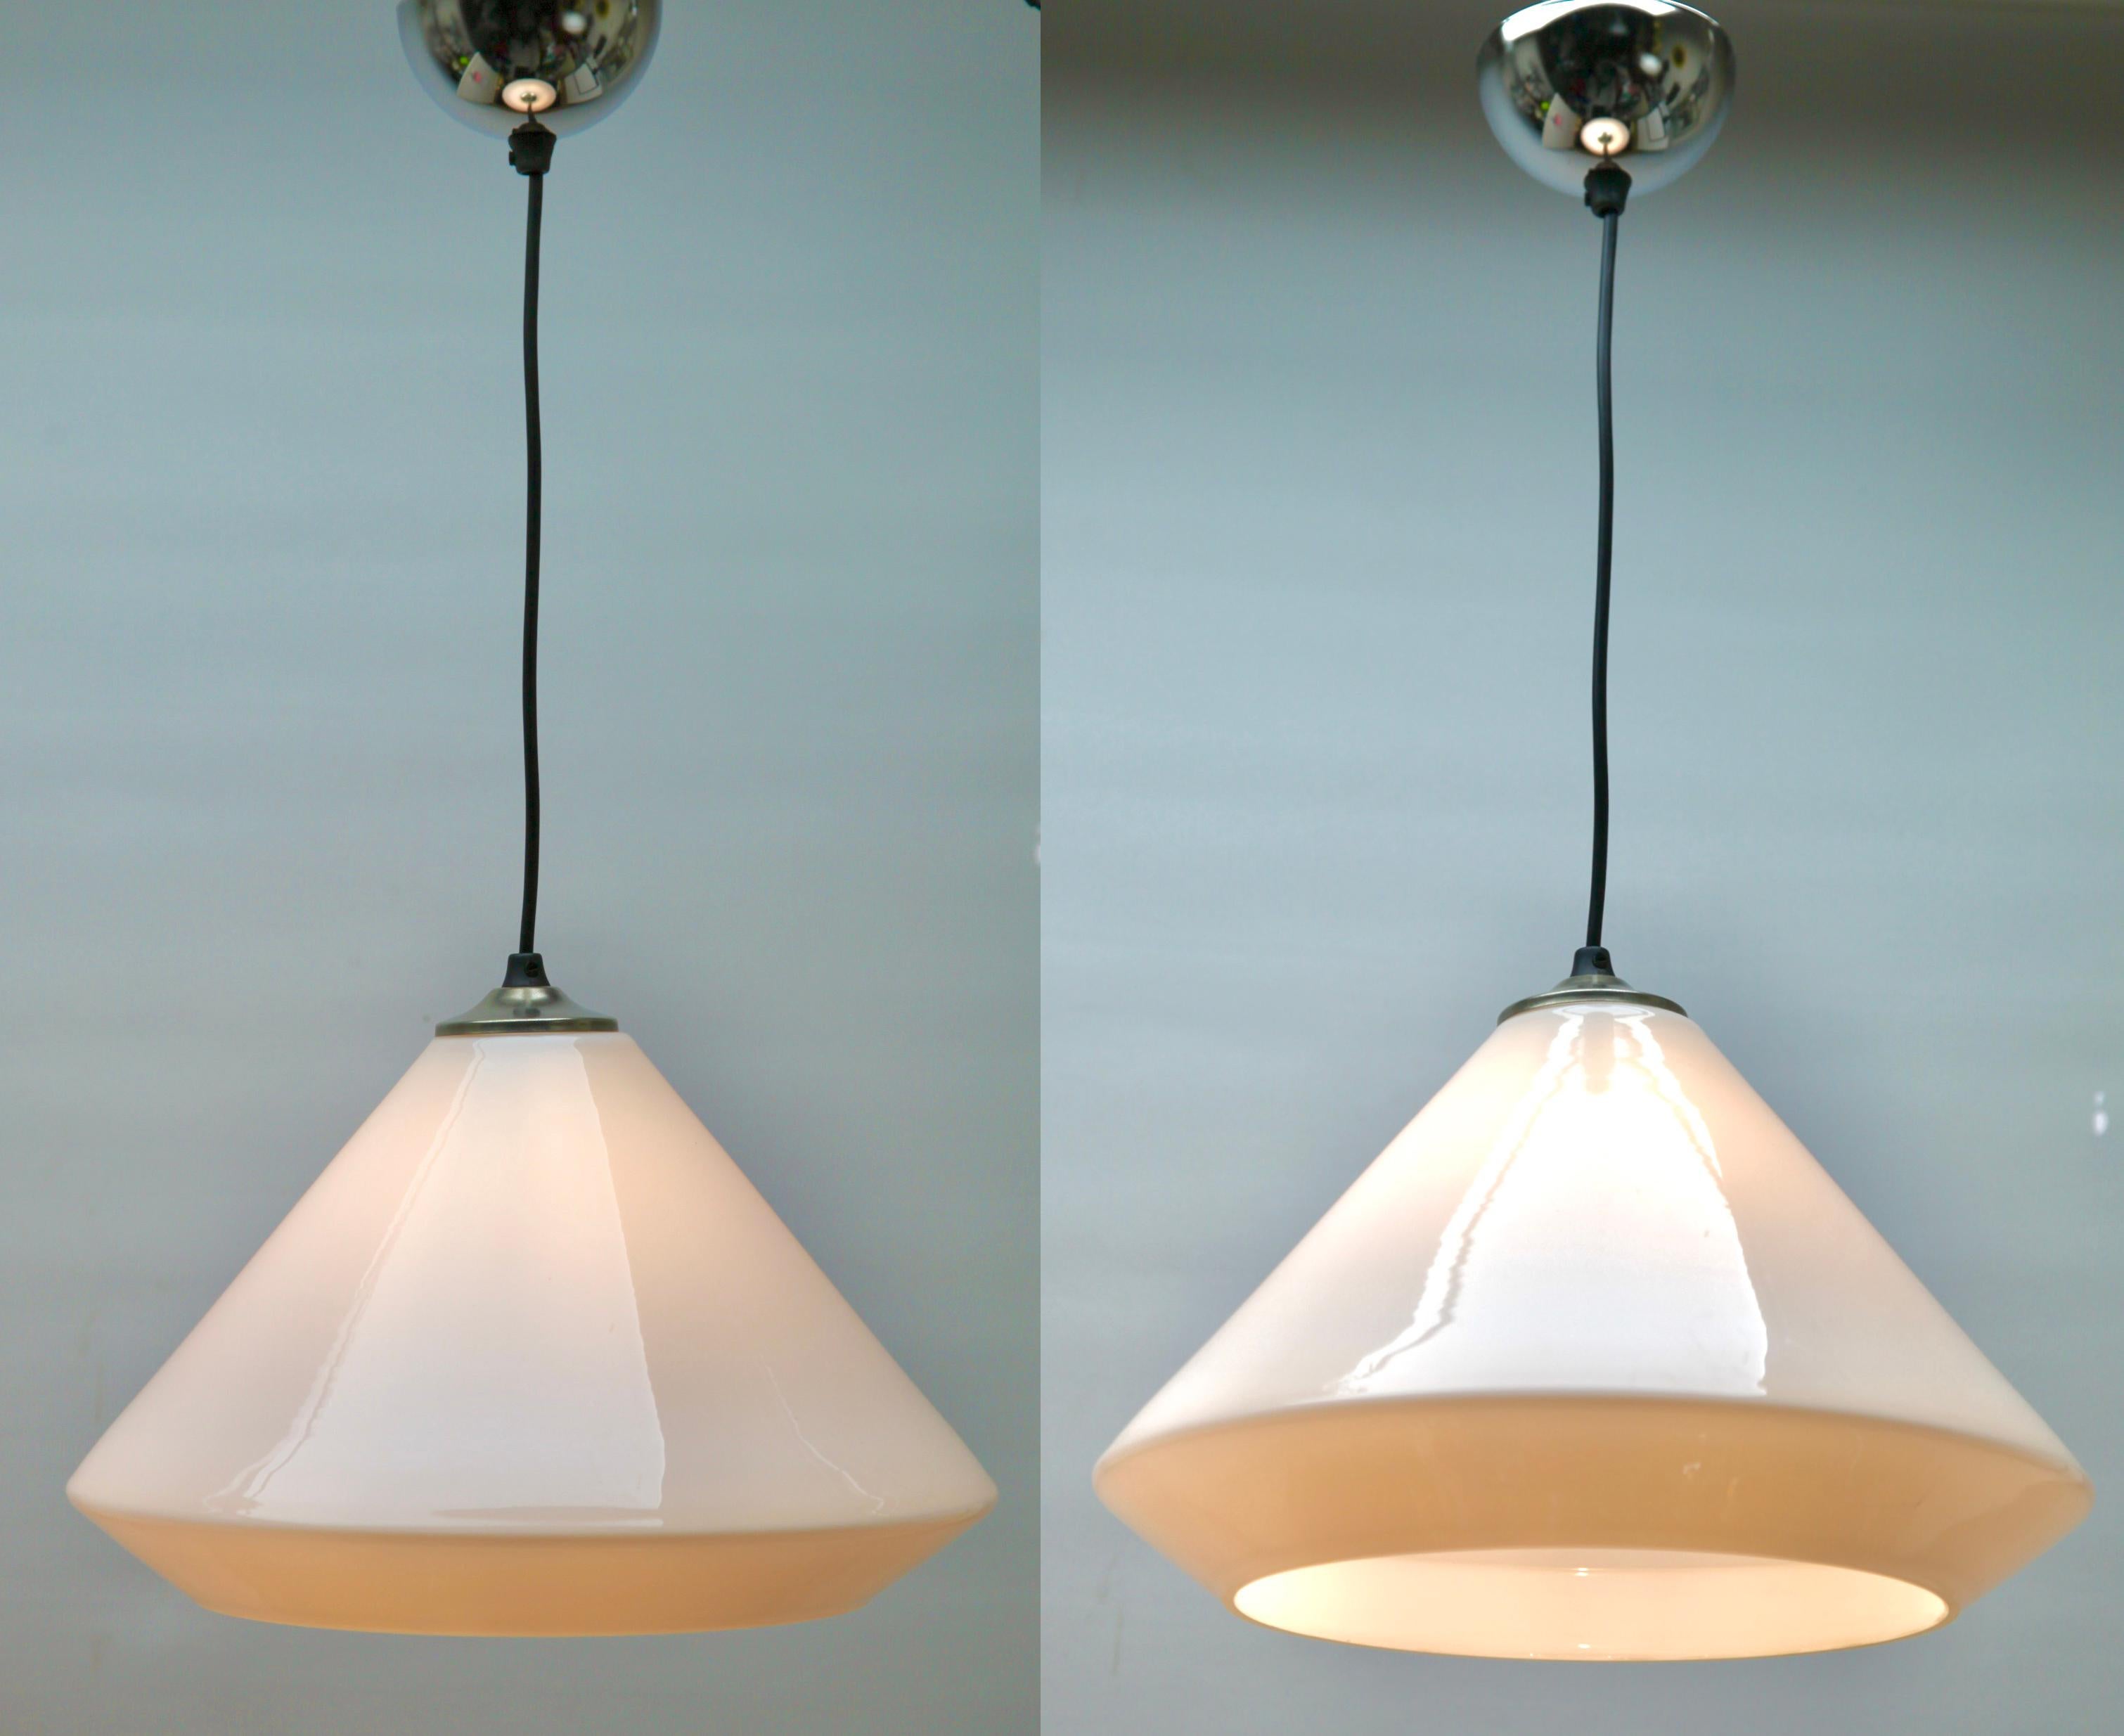 Hand-Crafted Pair Pendant Lamp with a Opaline Shade, Phillips Netherlands, 1930s